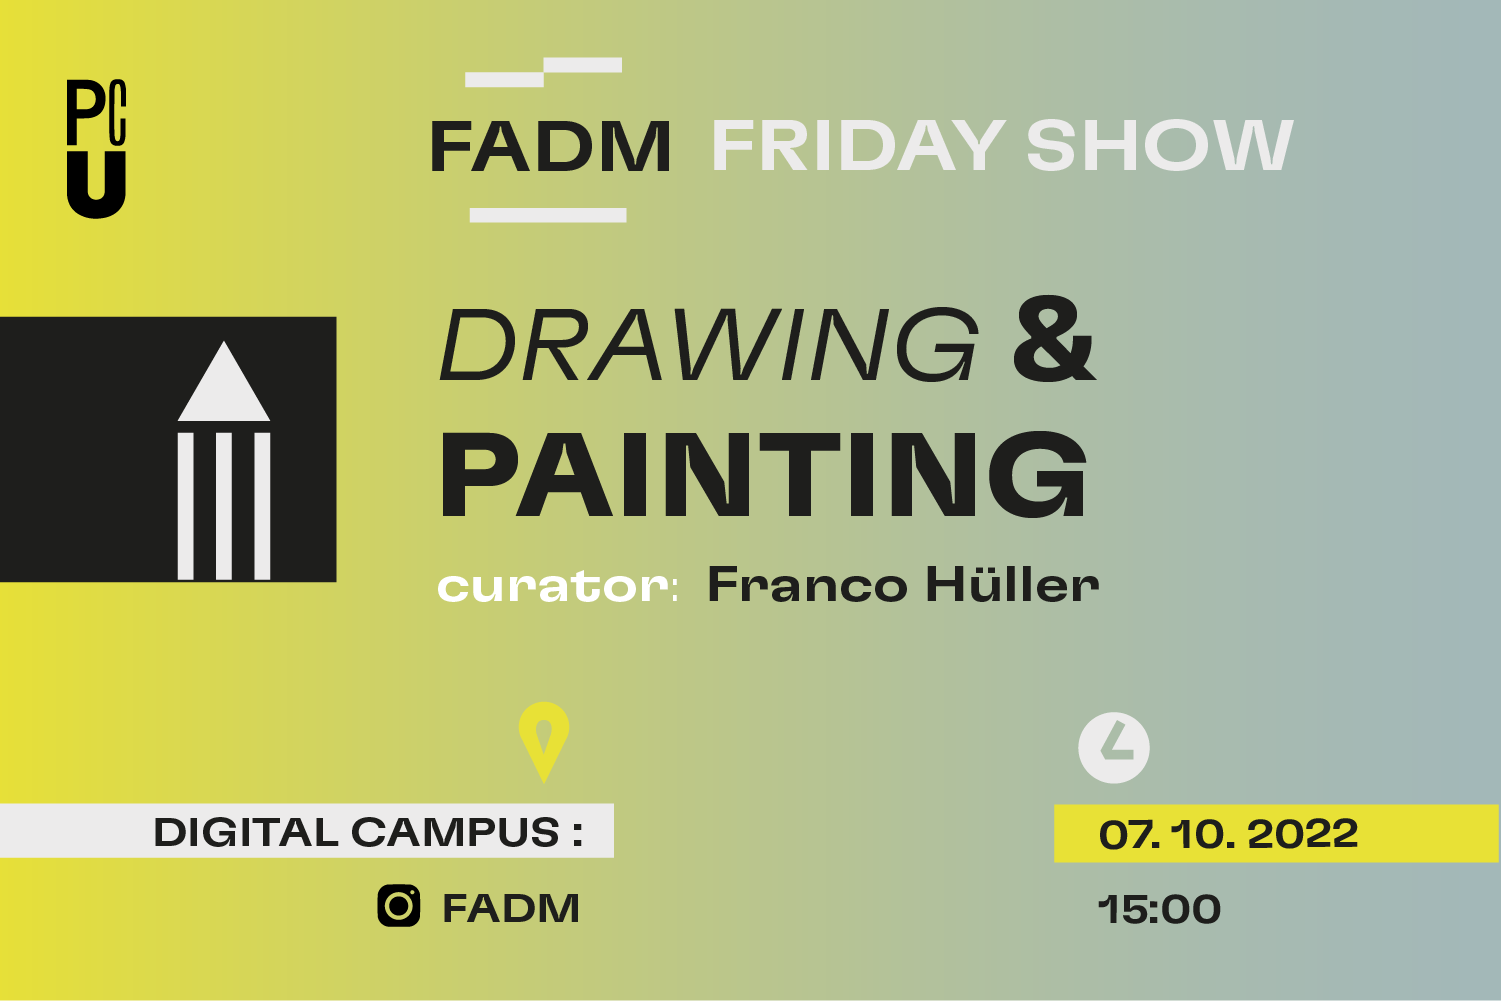 PCU Friday Show_Drawing_Painting